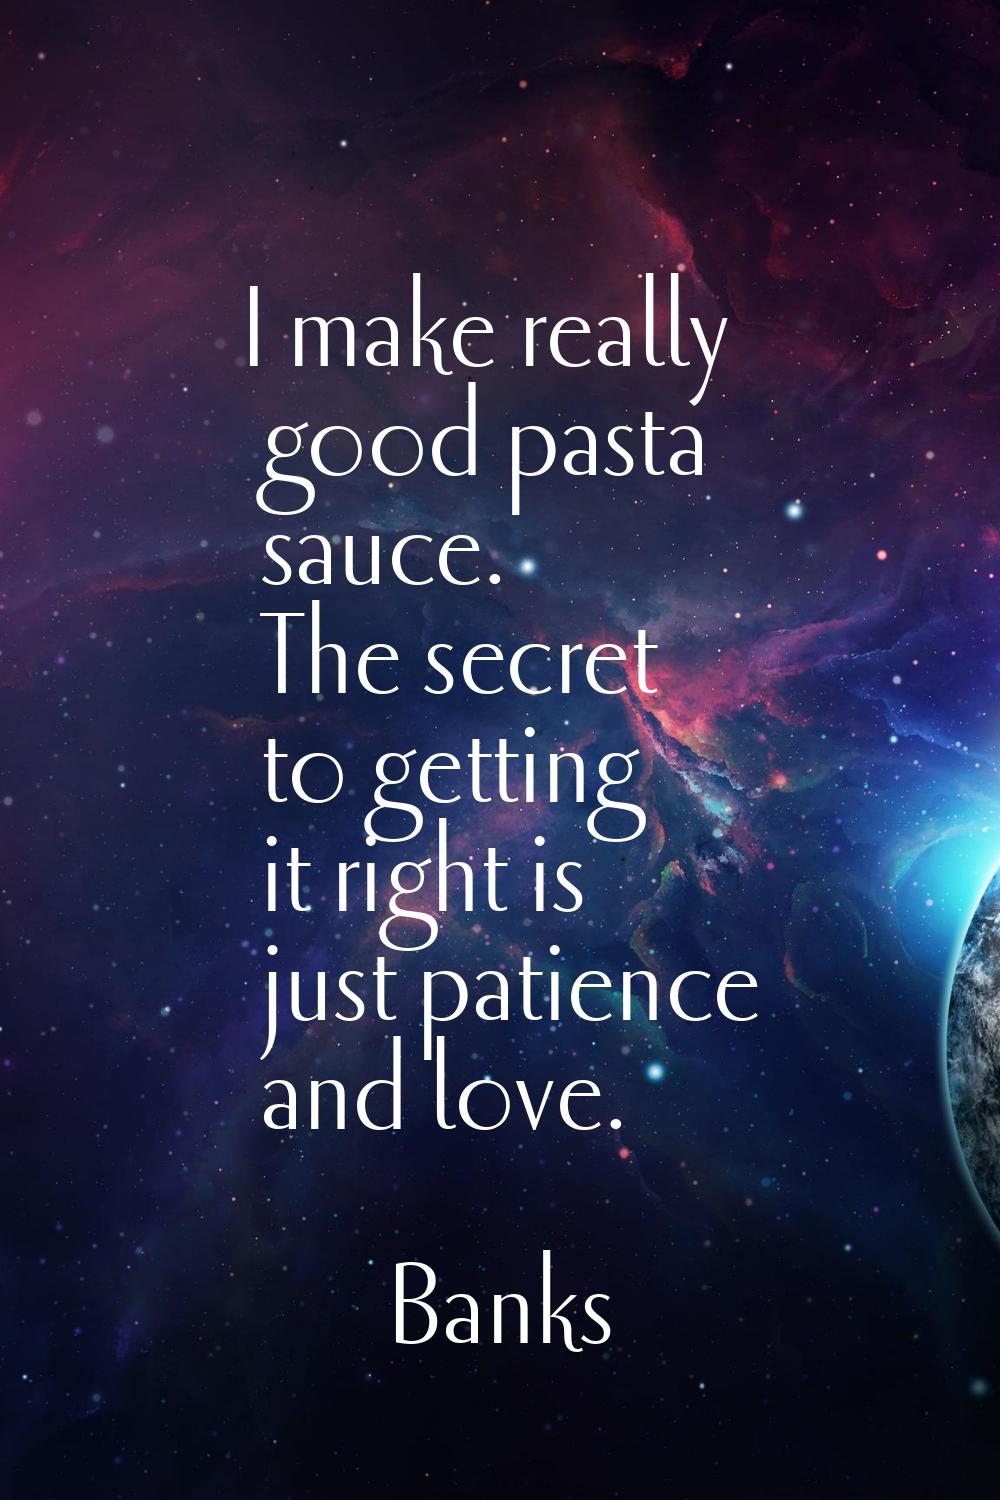 I make really good pasta sauce. The secret to getting it right is just patience and love.